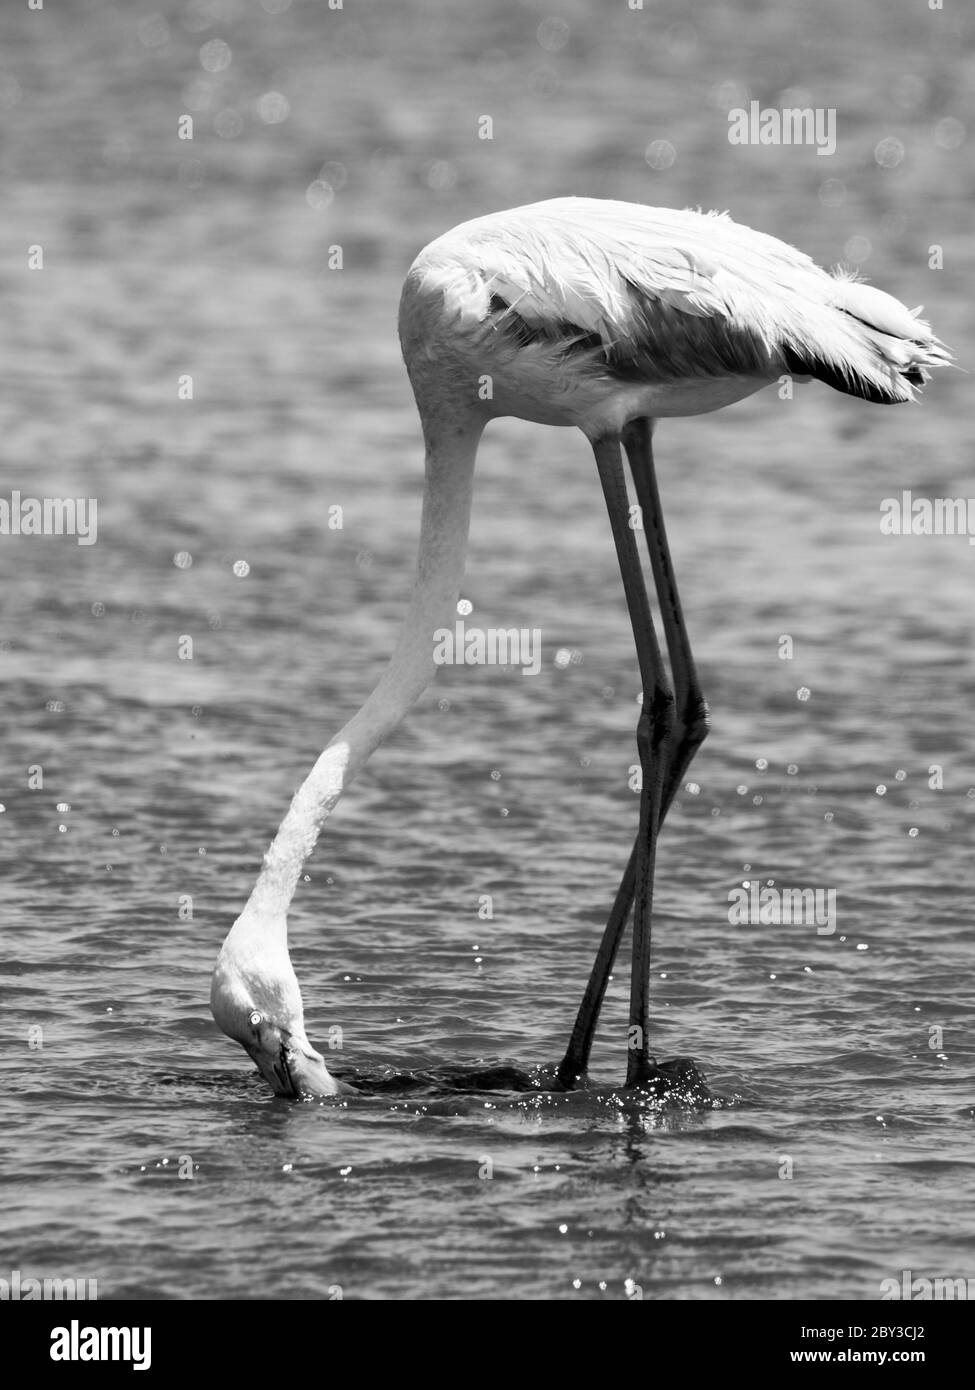 Flamingo eating from shallow water, Walvis Bay, Namibia. Black and white image. Stock Photo